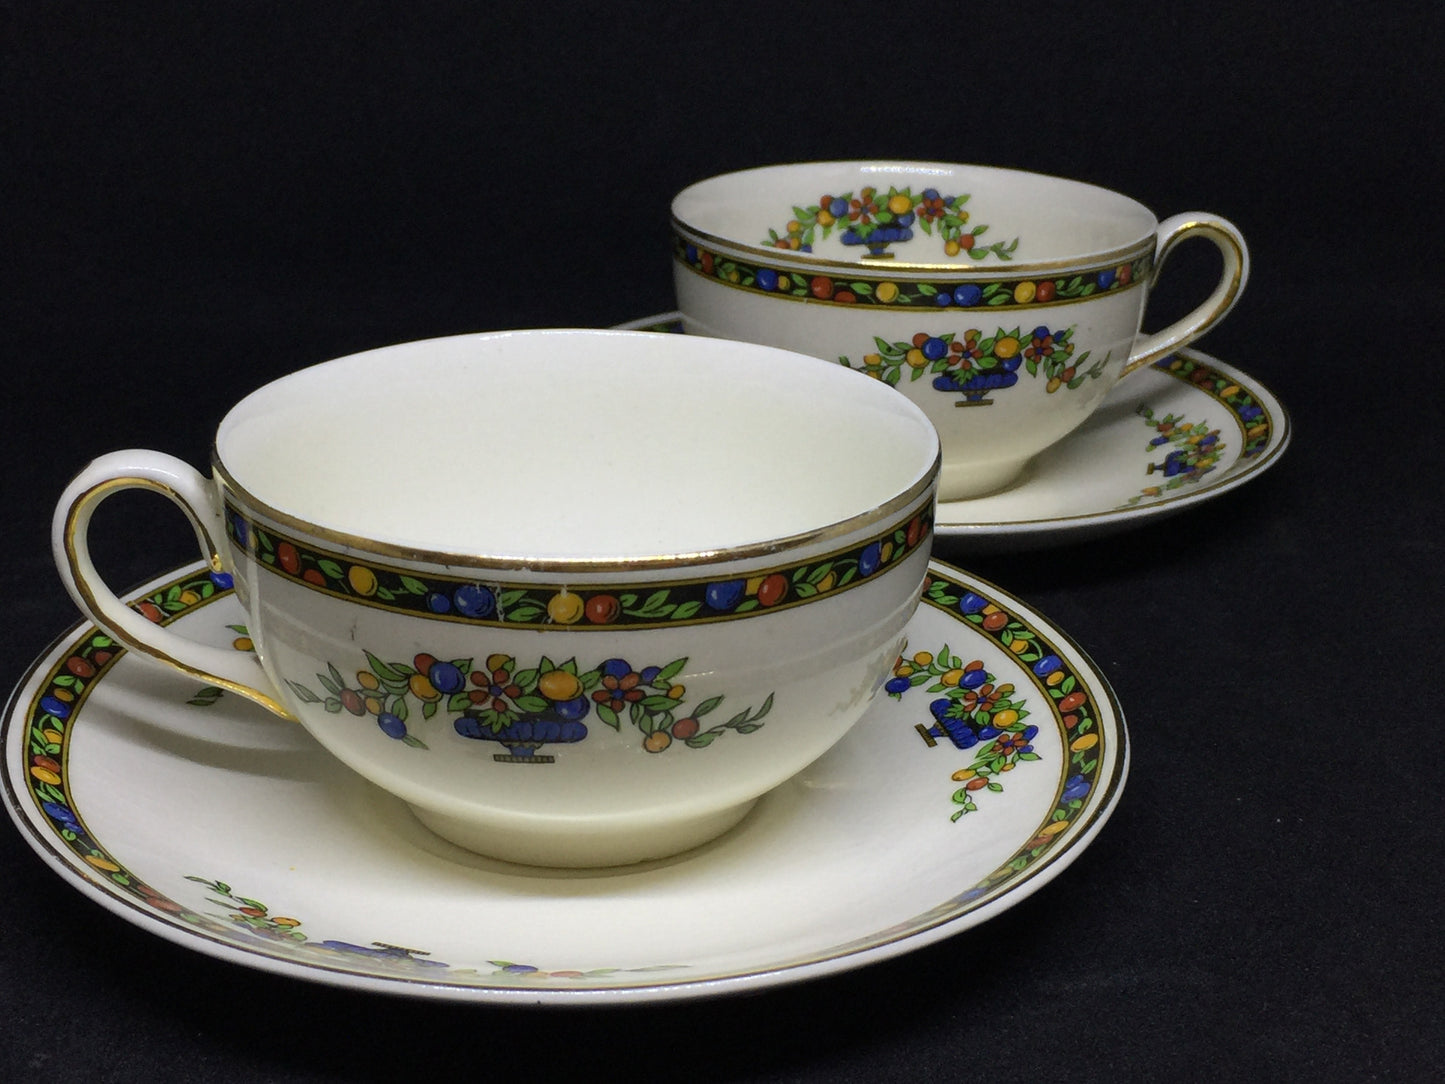 Antique 1030s Johnson Bros Pareek Cups and Saucers 2 Sets